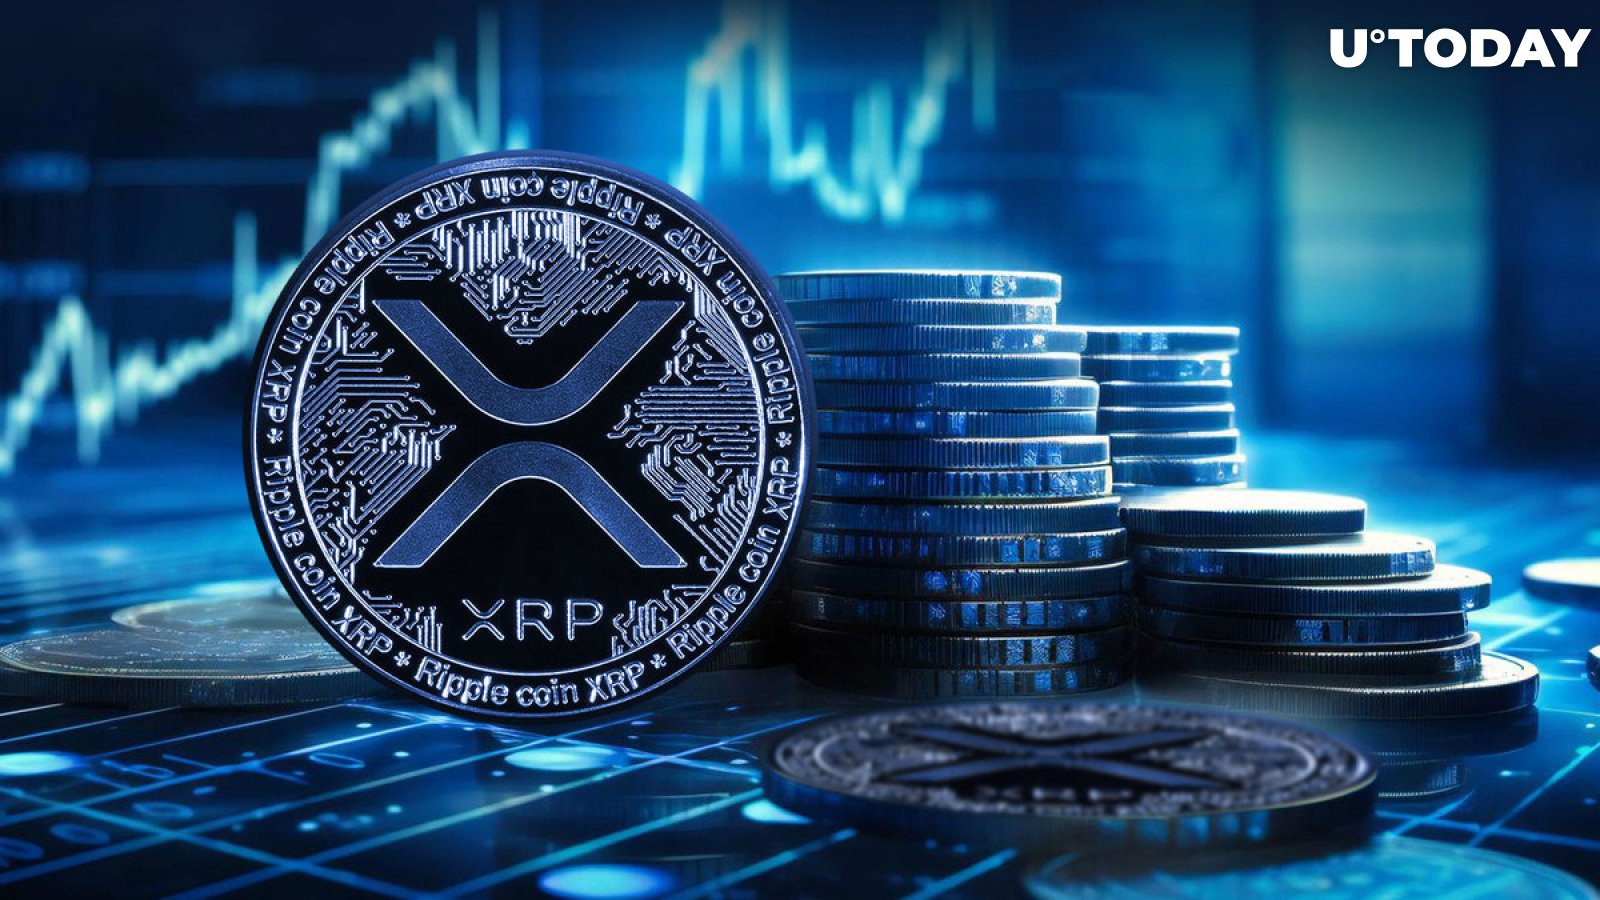 XRP up 96% in Trading Volume as XRP Price Finds Major Support